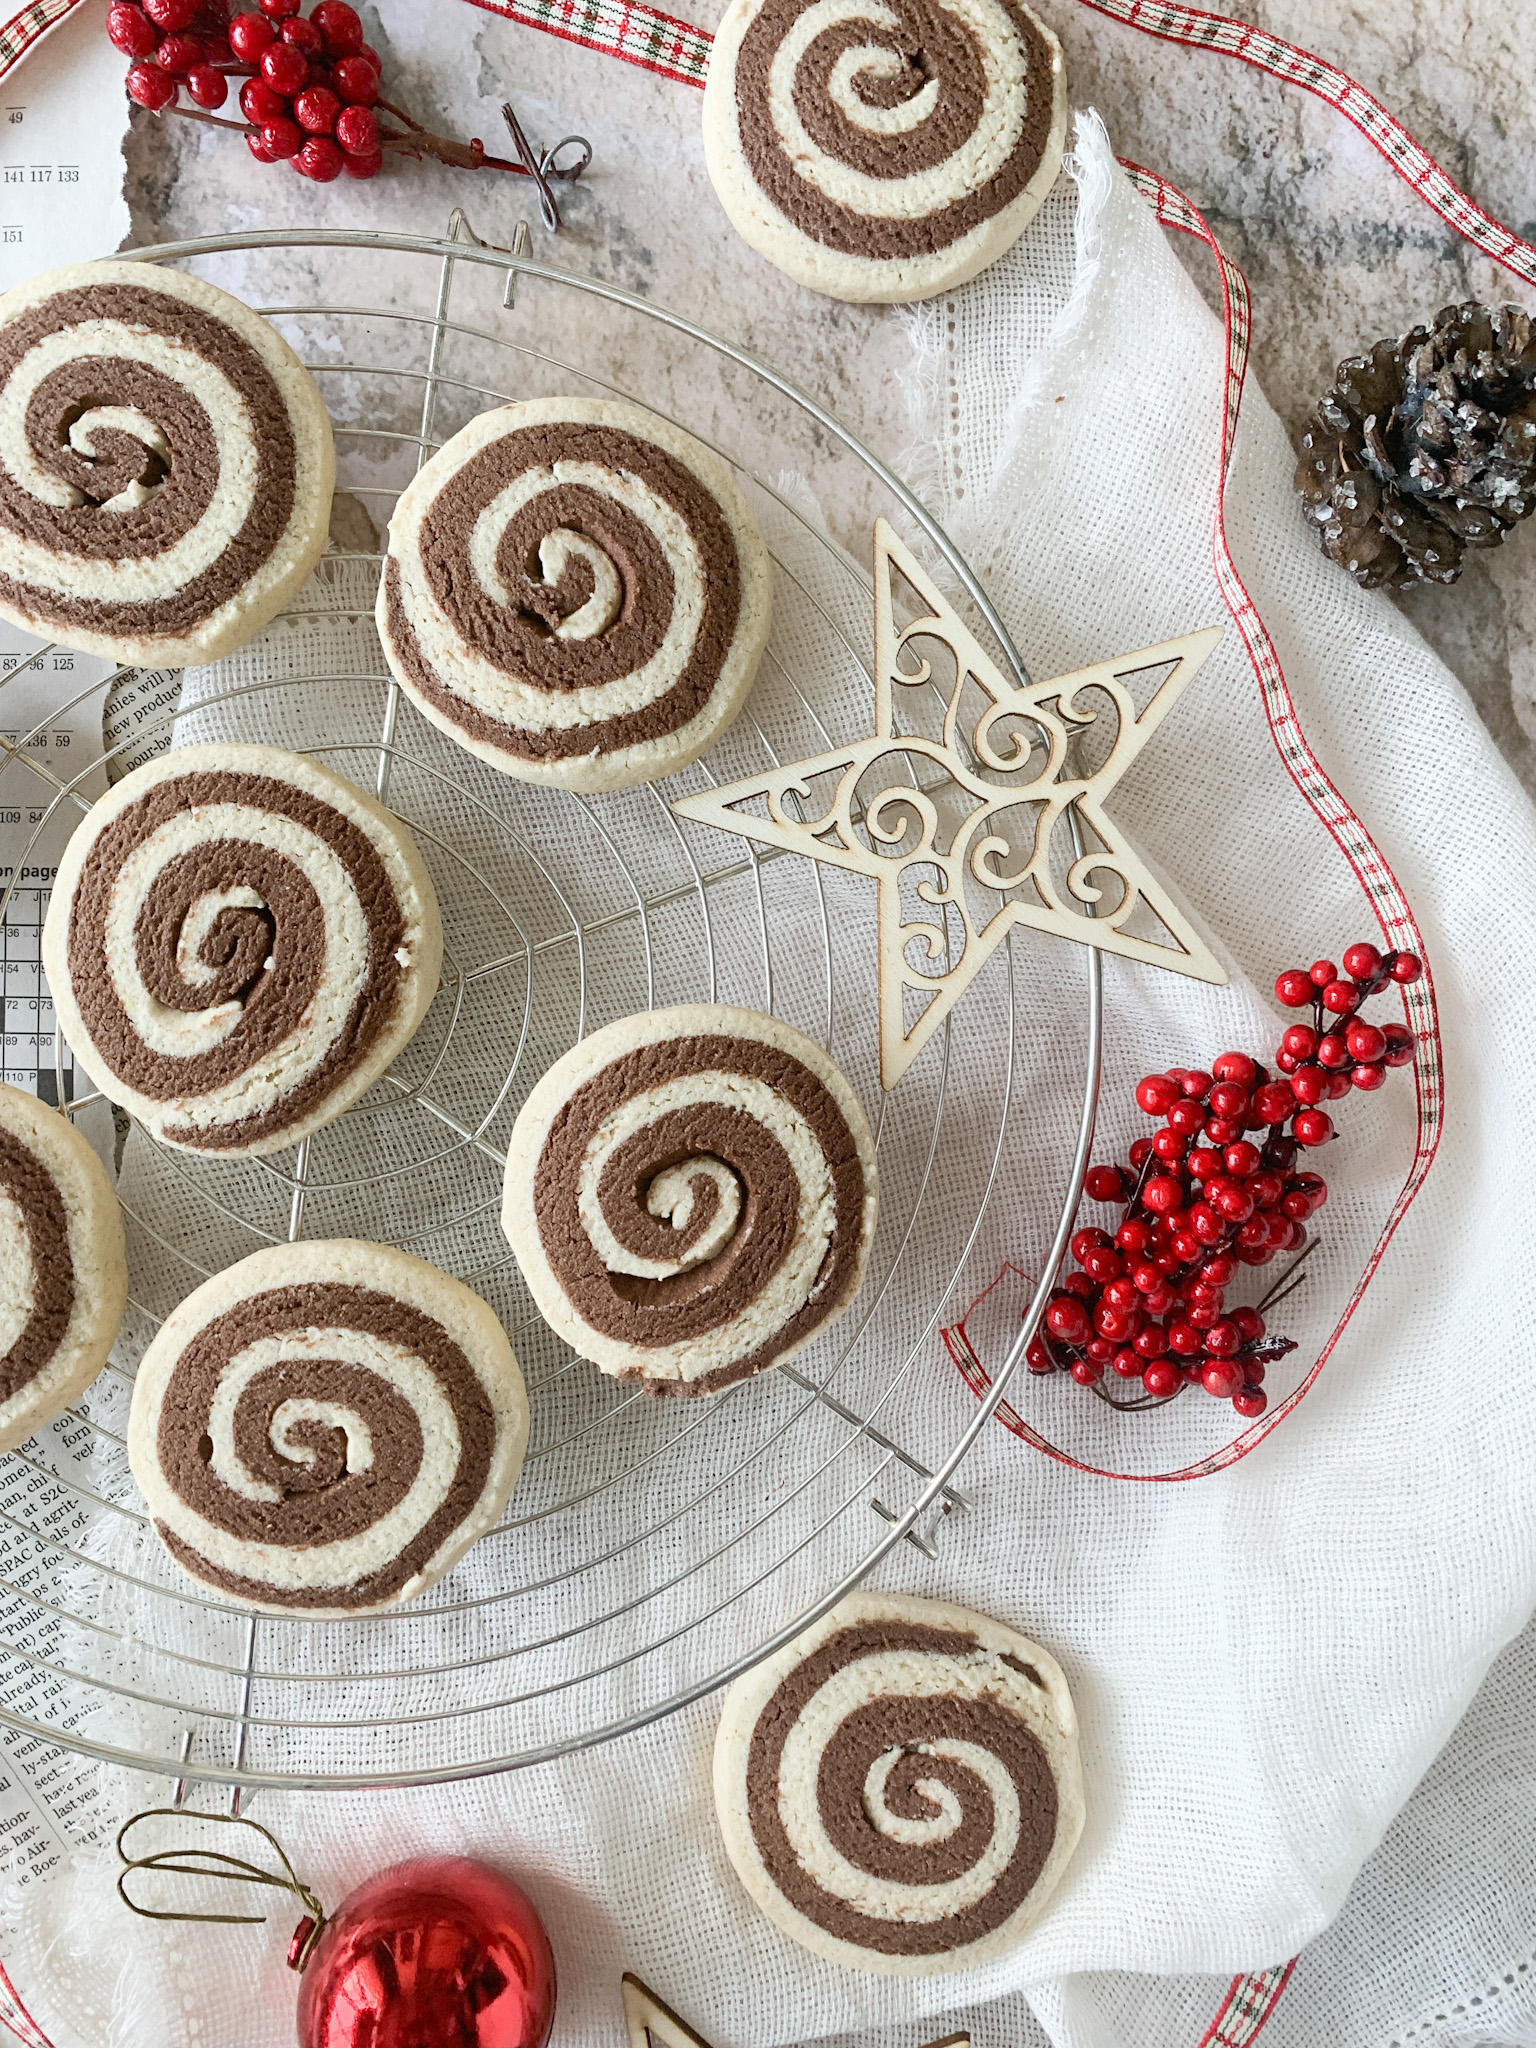 Gluten and dairy-free pinwheel cookies that are such a holiday classic. Vanilla and chocolate all swirled together.